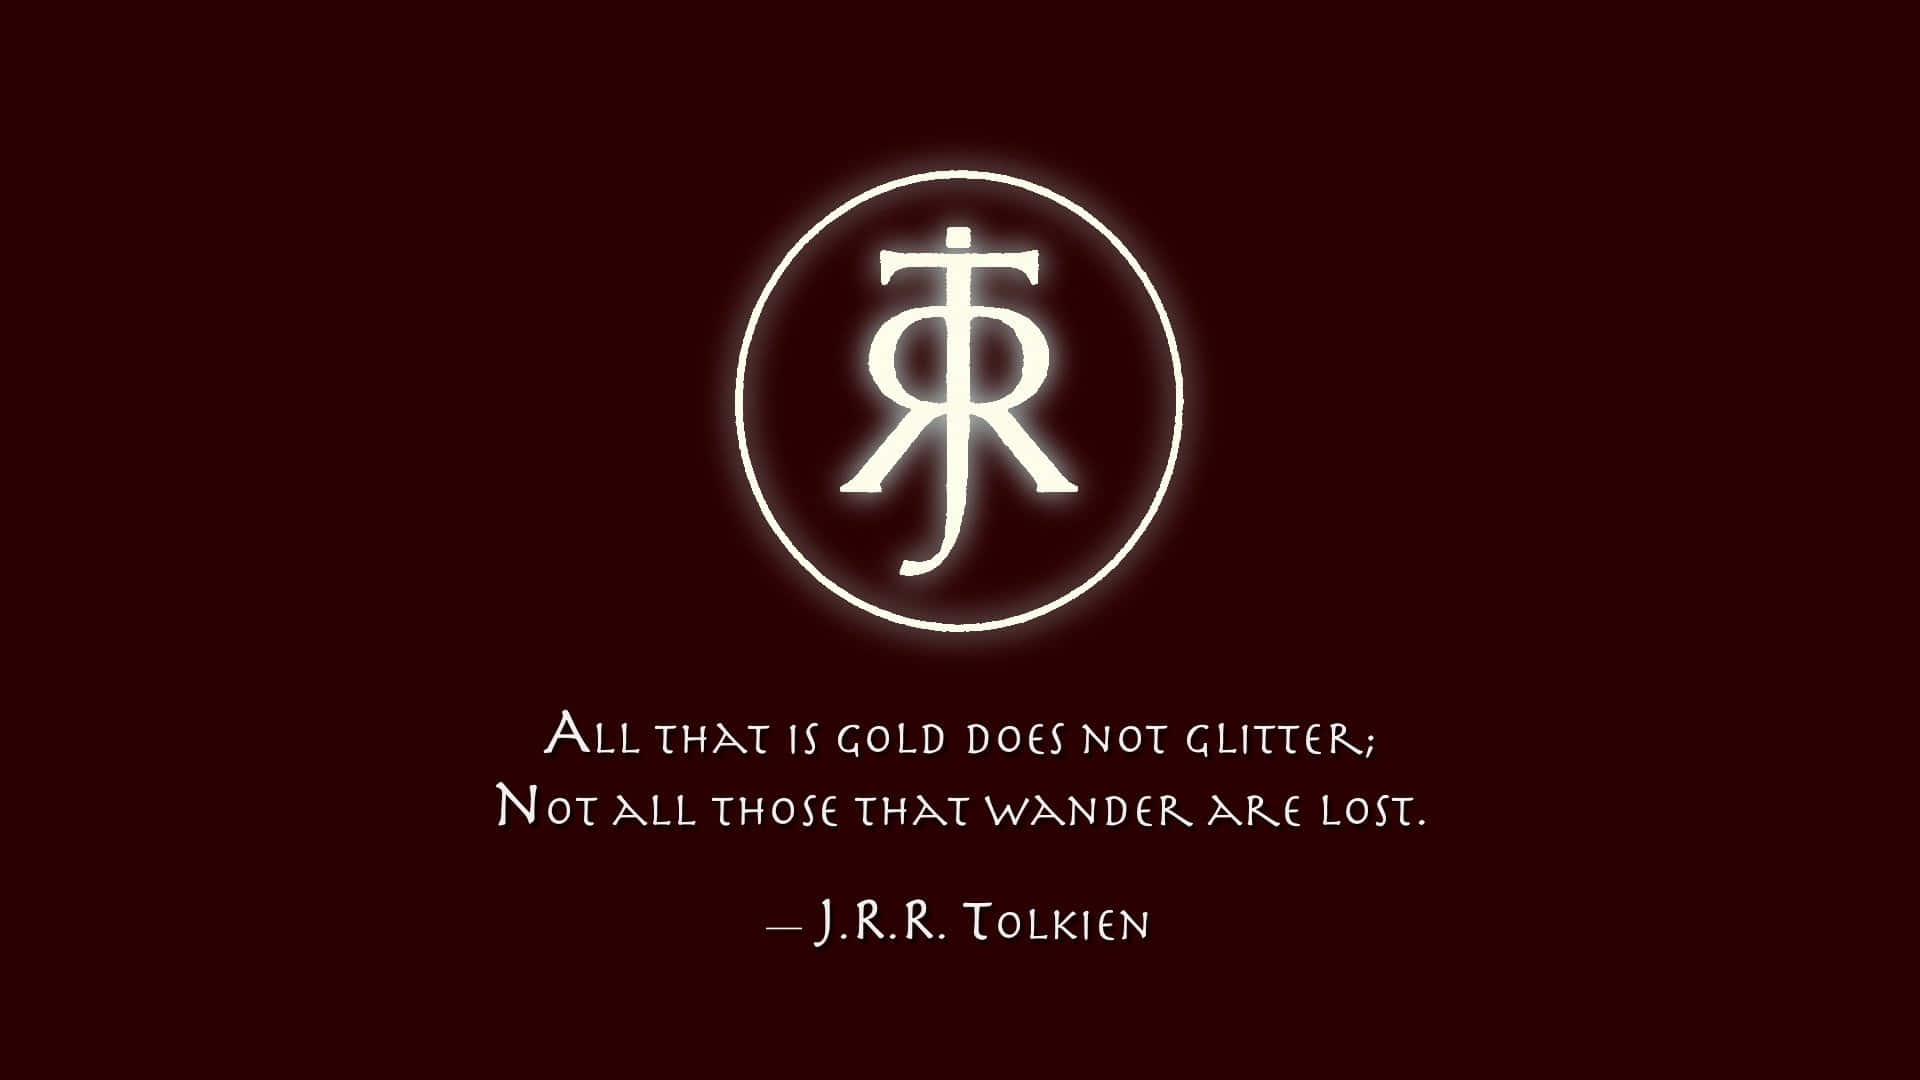 Tolkien Gold Not Glitter Quote Wallpaper